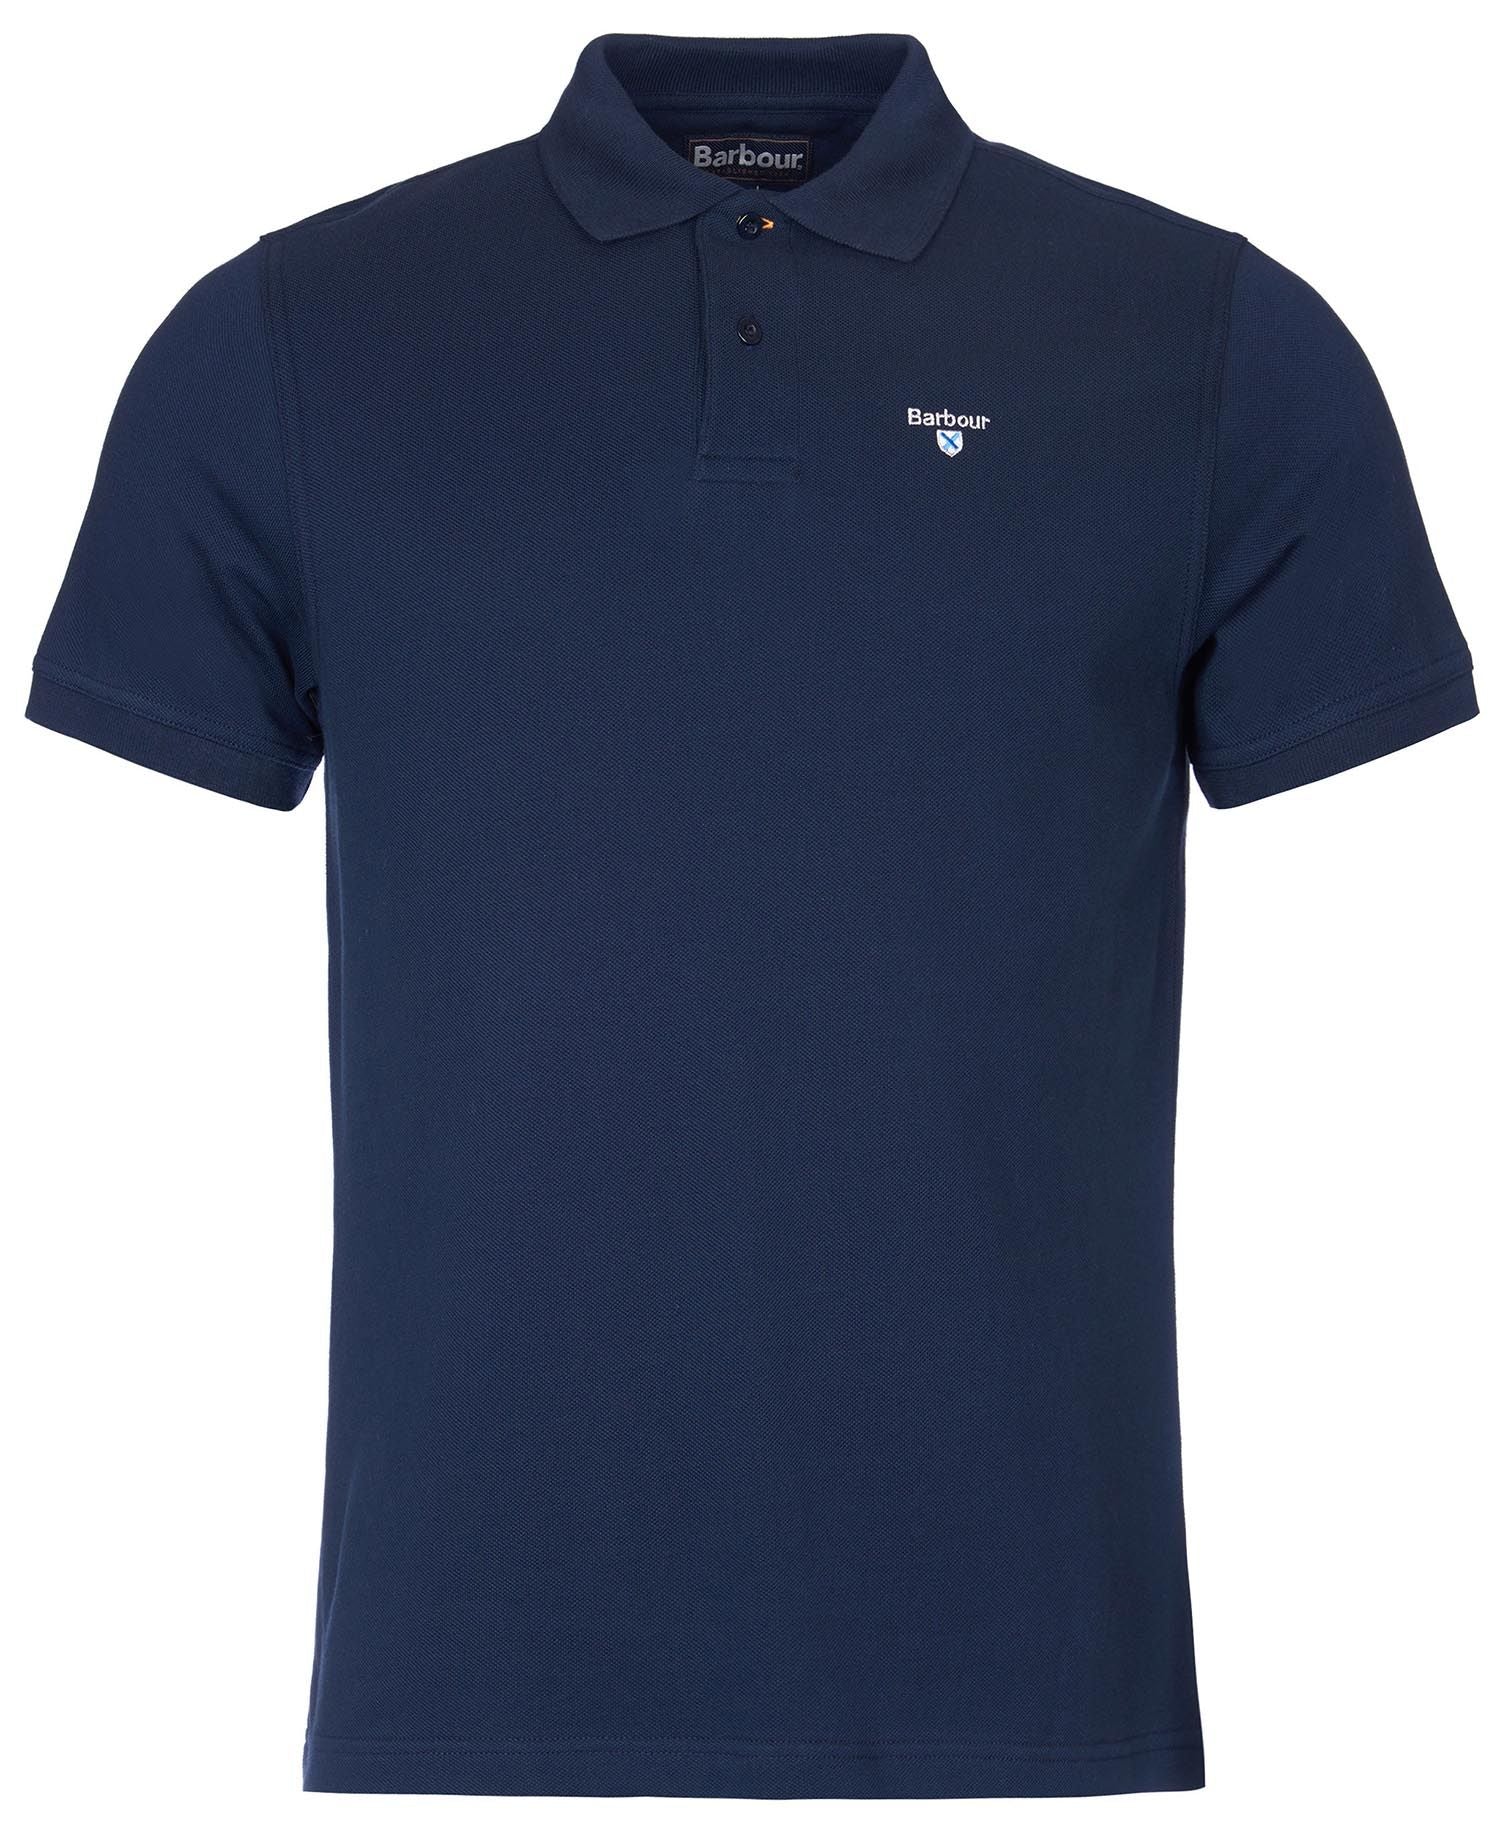 Barbour - Herre, Polo - New Navy